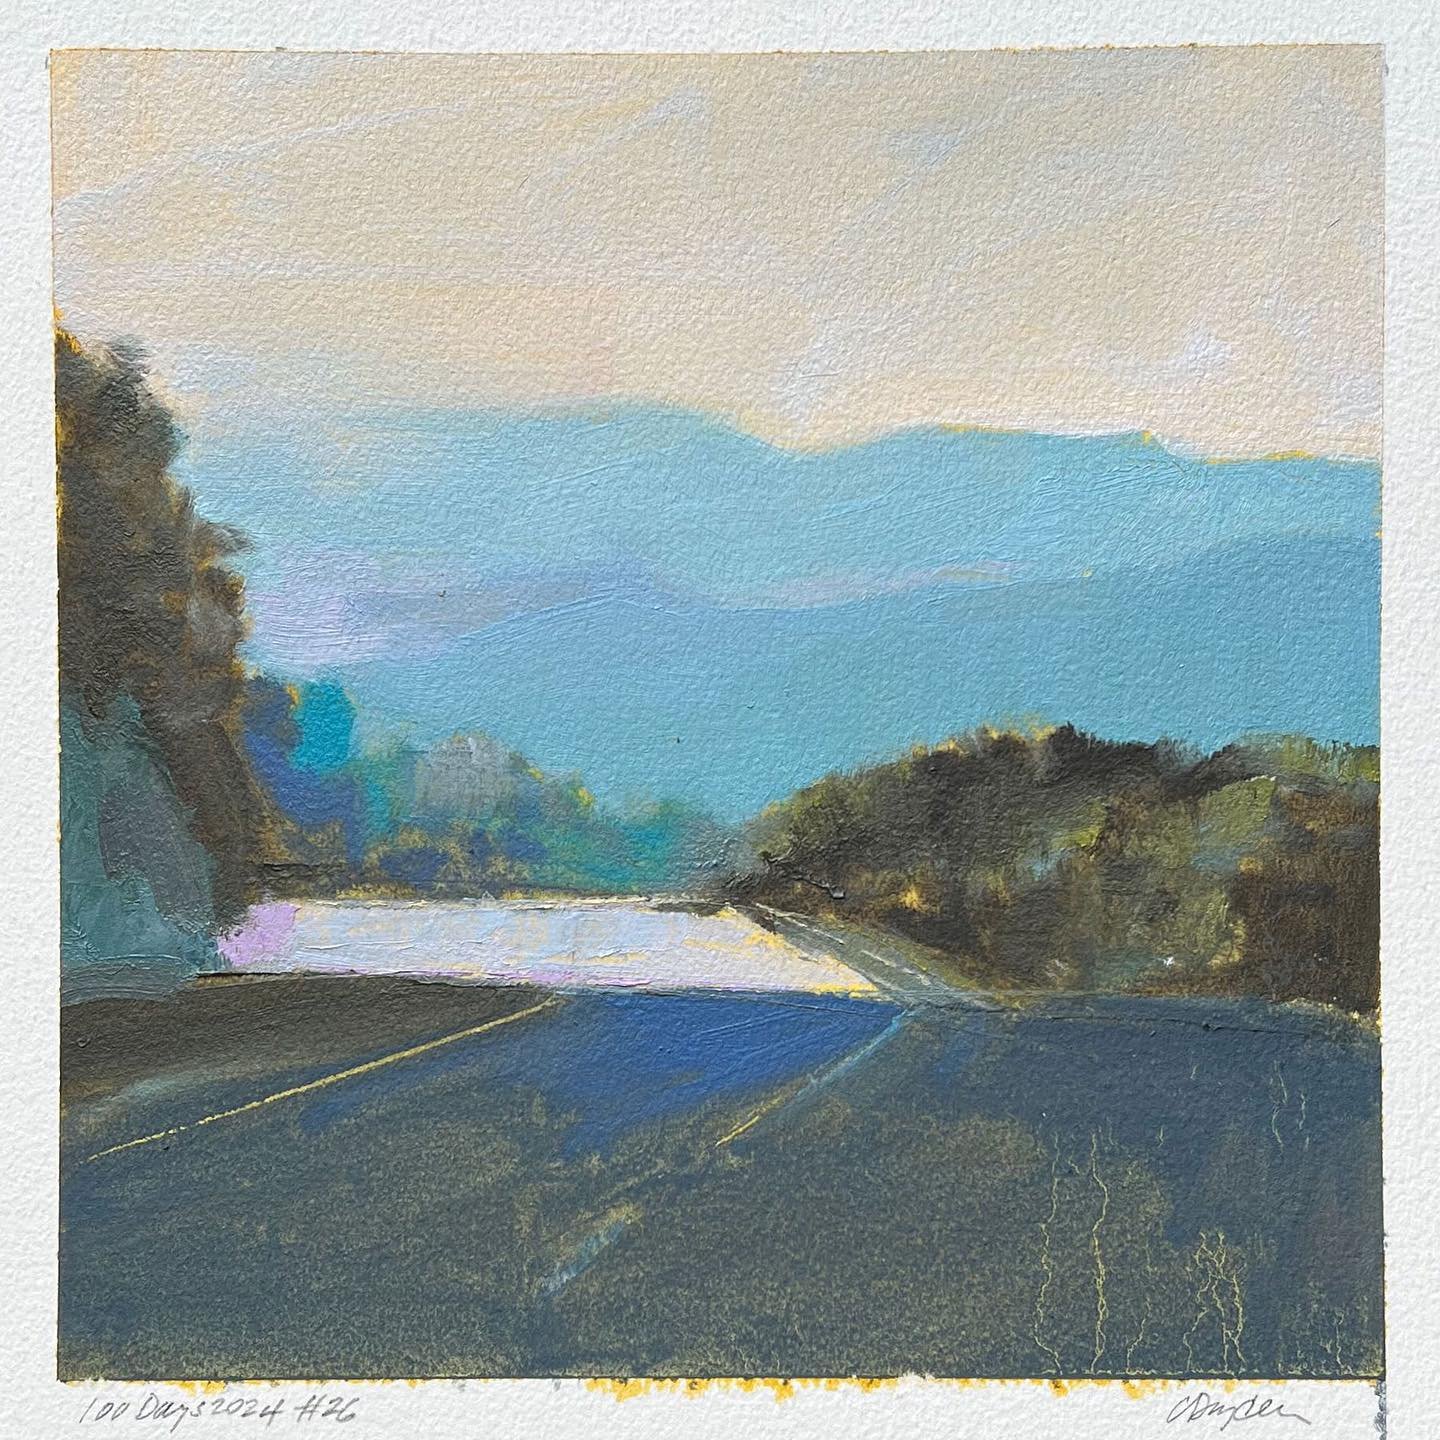 26/100 #100daysoflandscapestudies
8x8, oil on paper
#the100dayproject